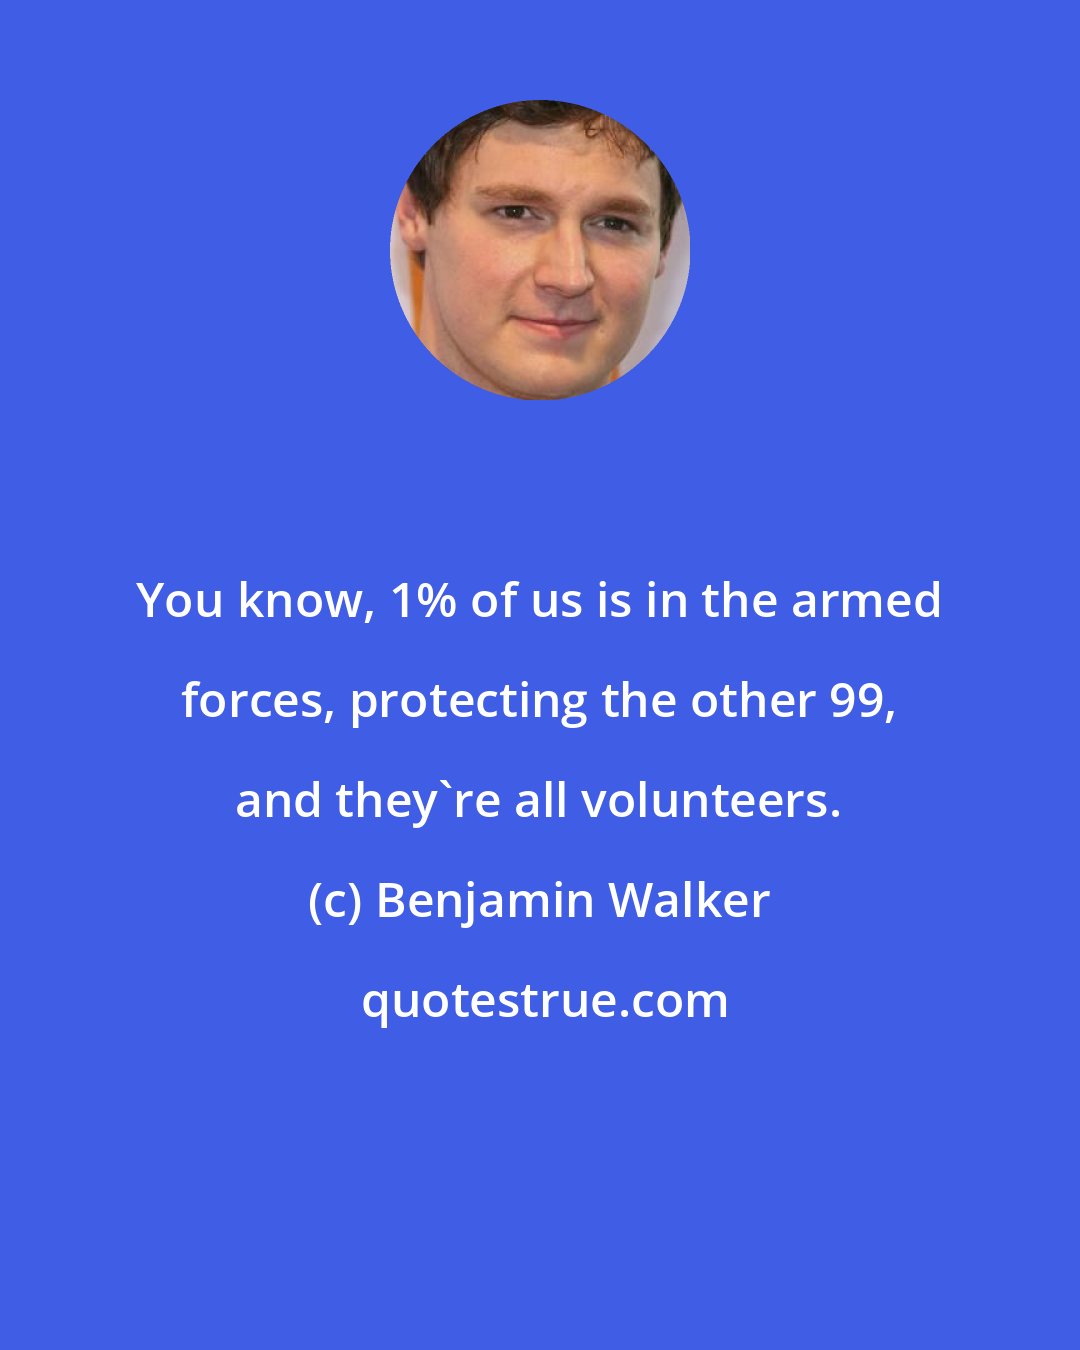 Benjamin Walker: You know, 1% of us is in the armed forces, protecting the other 99, and they're all volunteers.